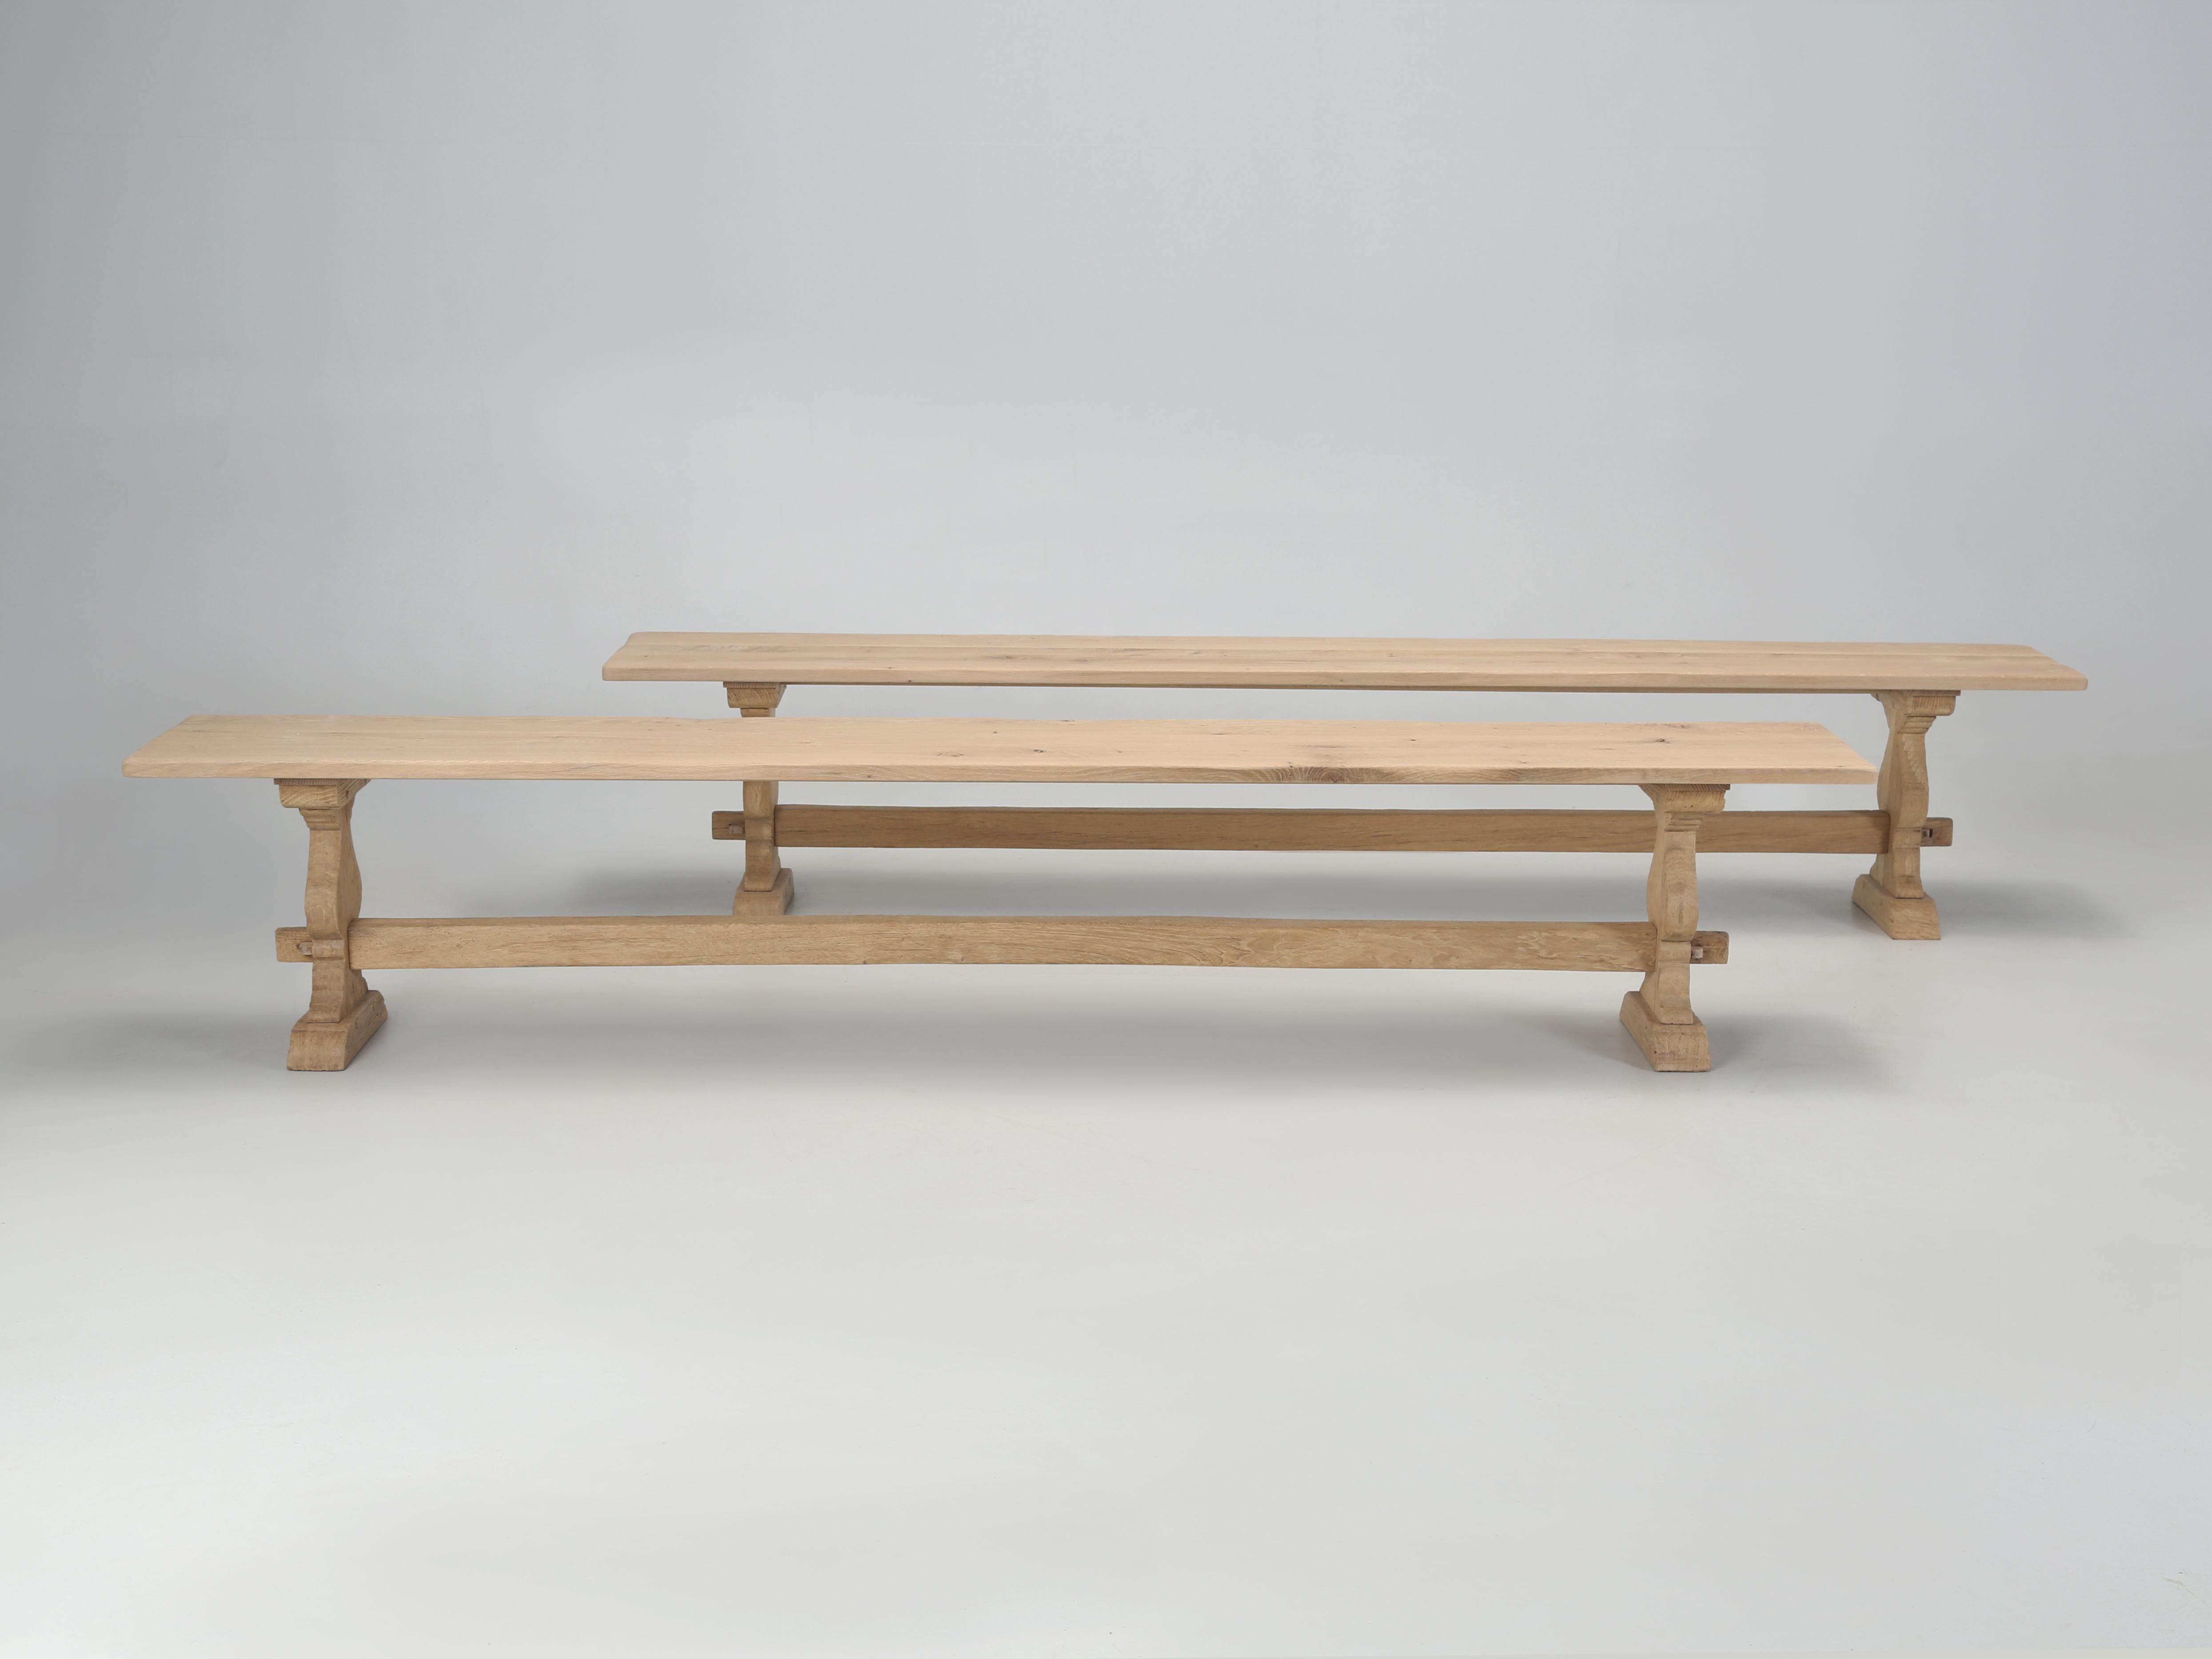 Wood Pair Antique French White Oak Farm Table Benches in Restored Condition c1900's For Sale